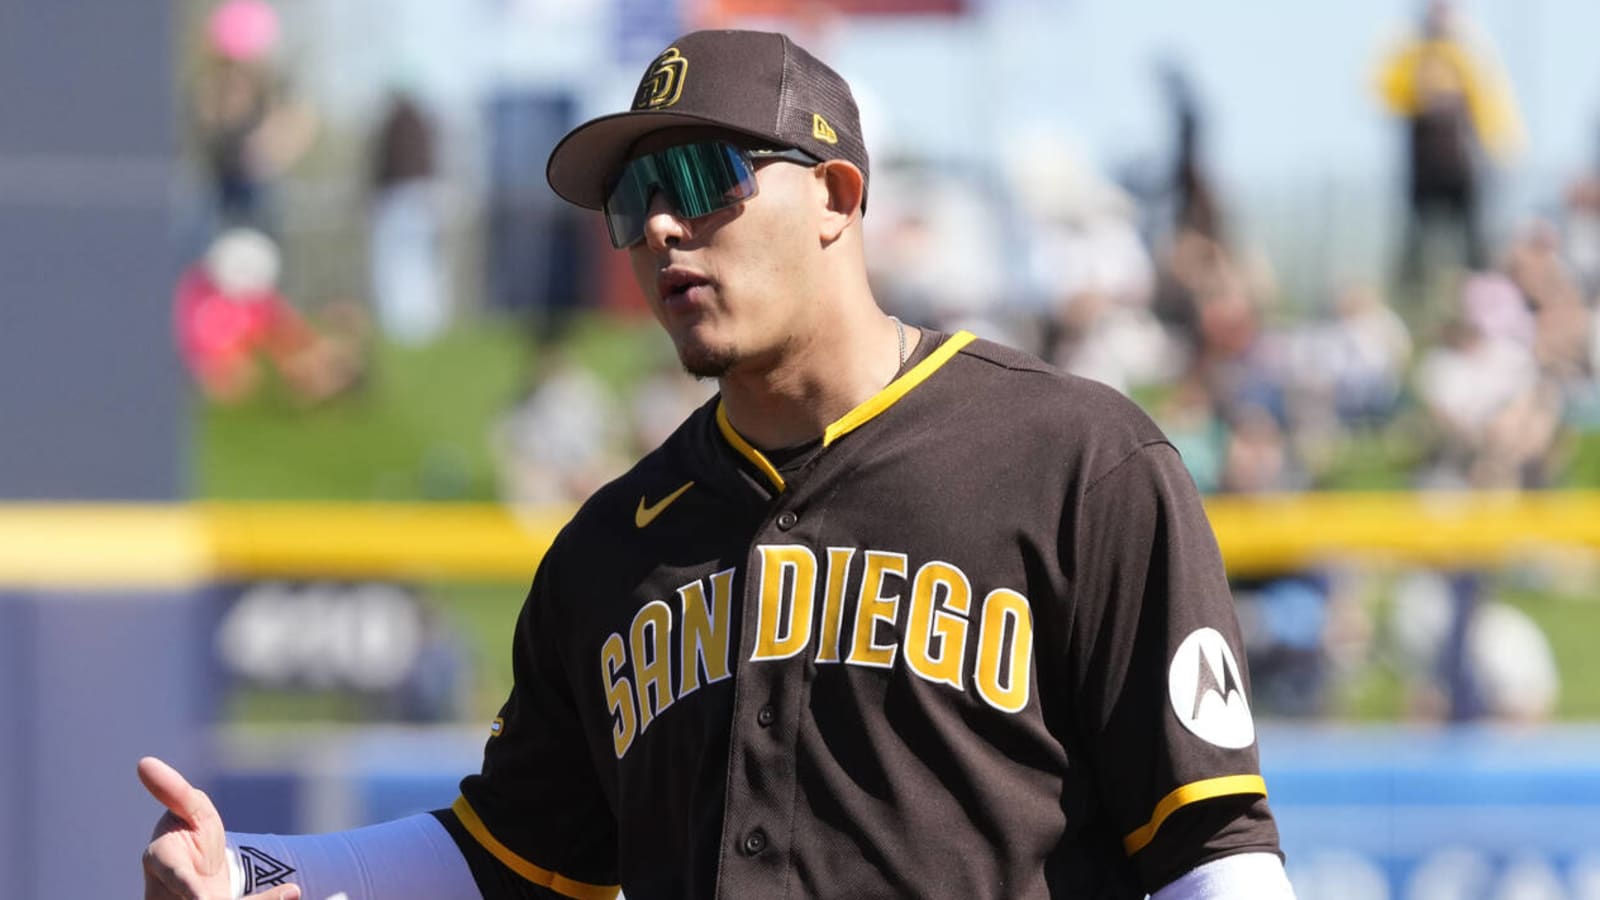 Reports: Manny Machado agrees to 11-year extension with Padres